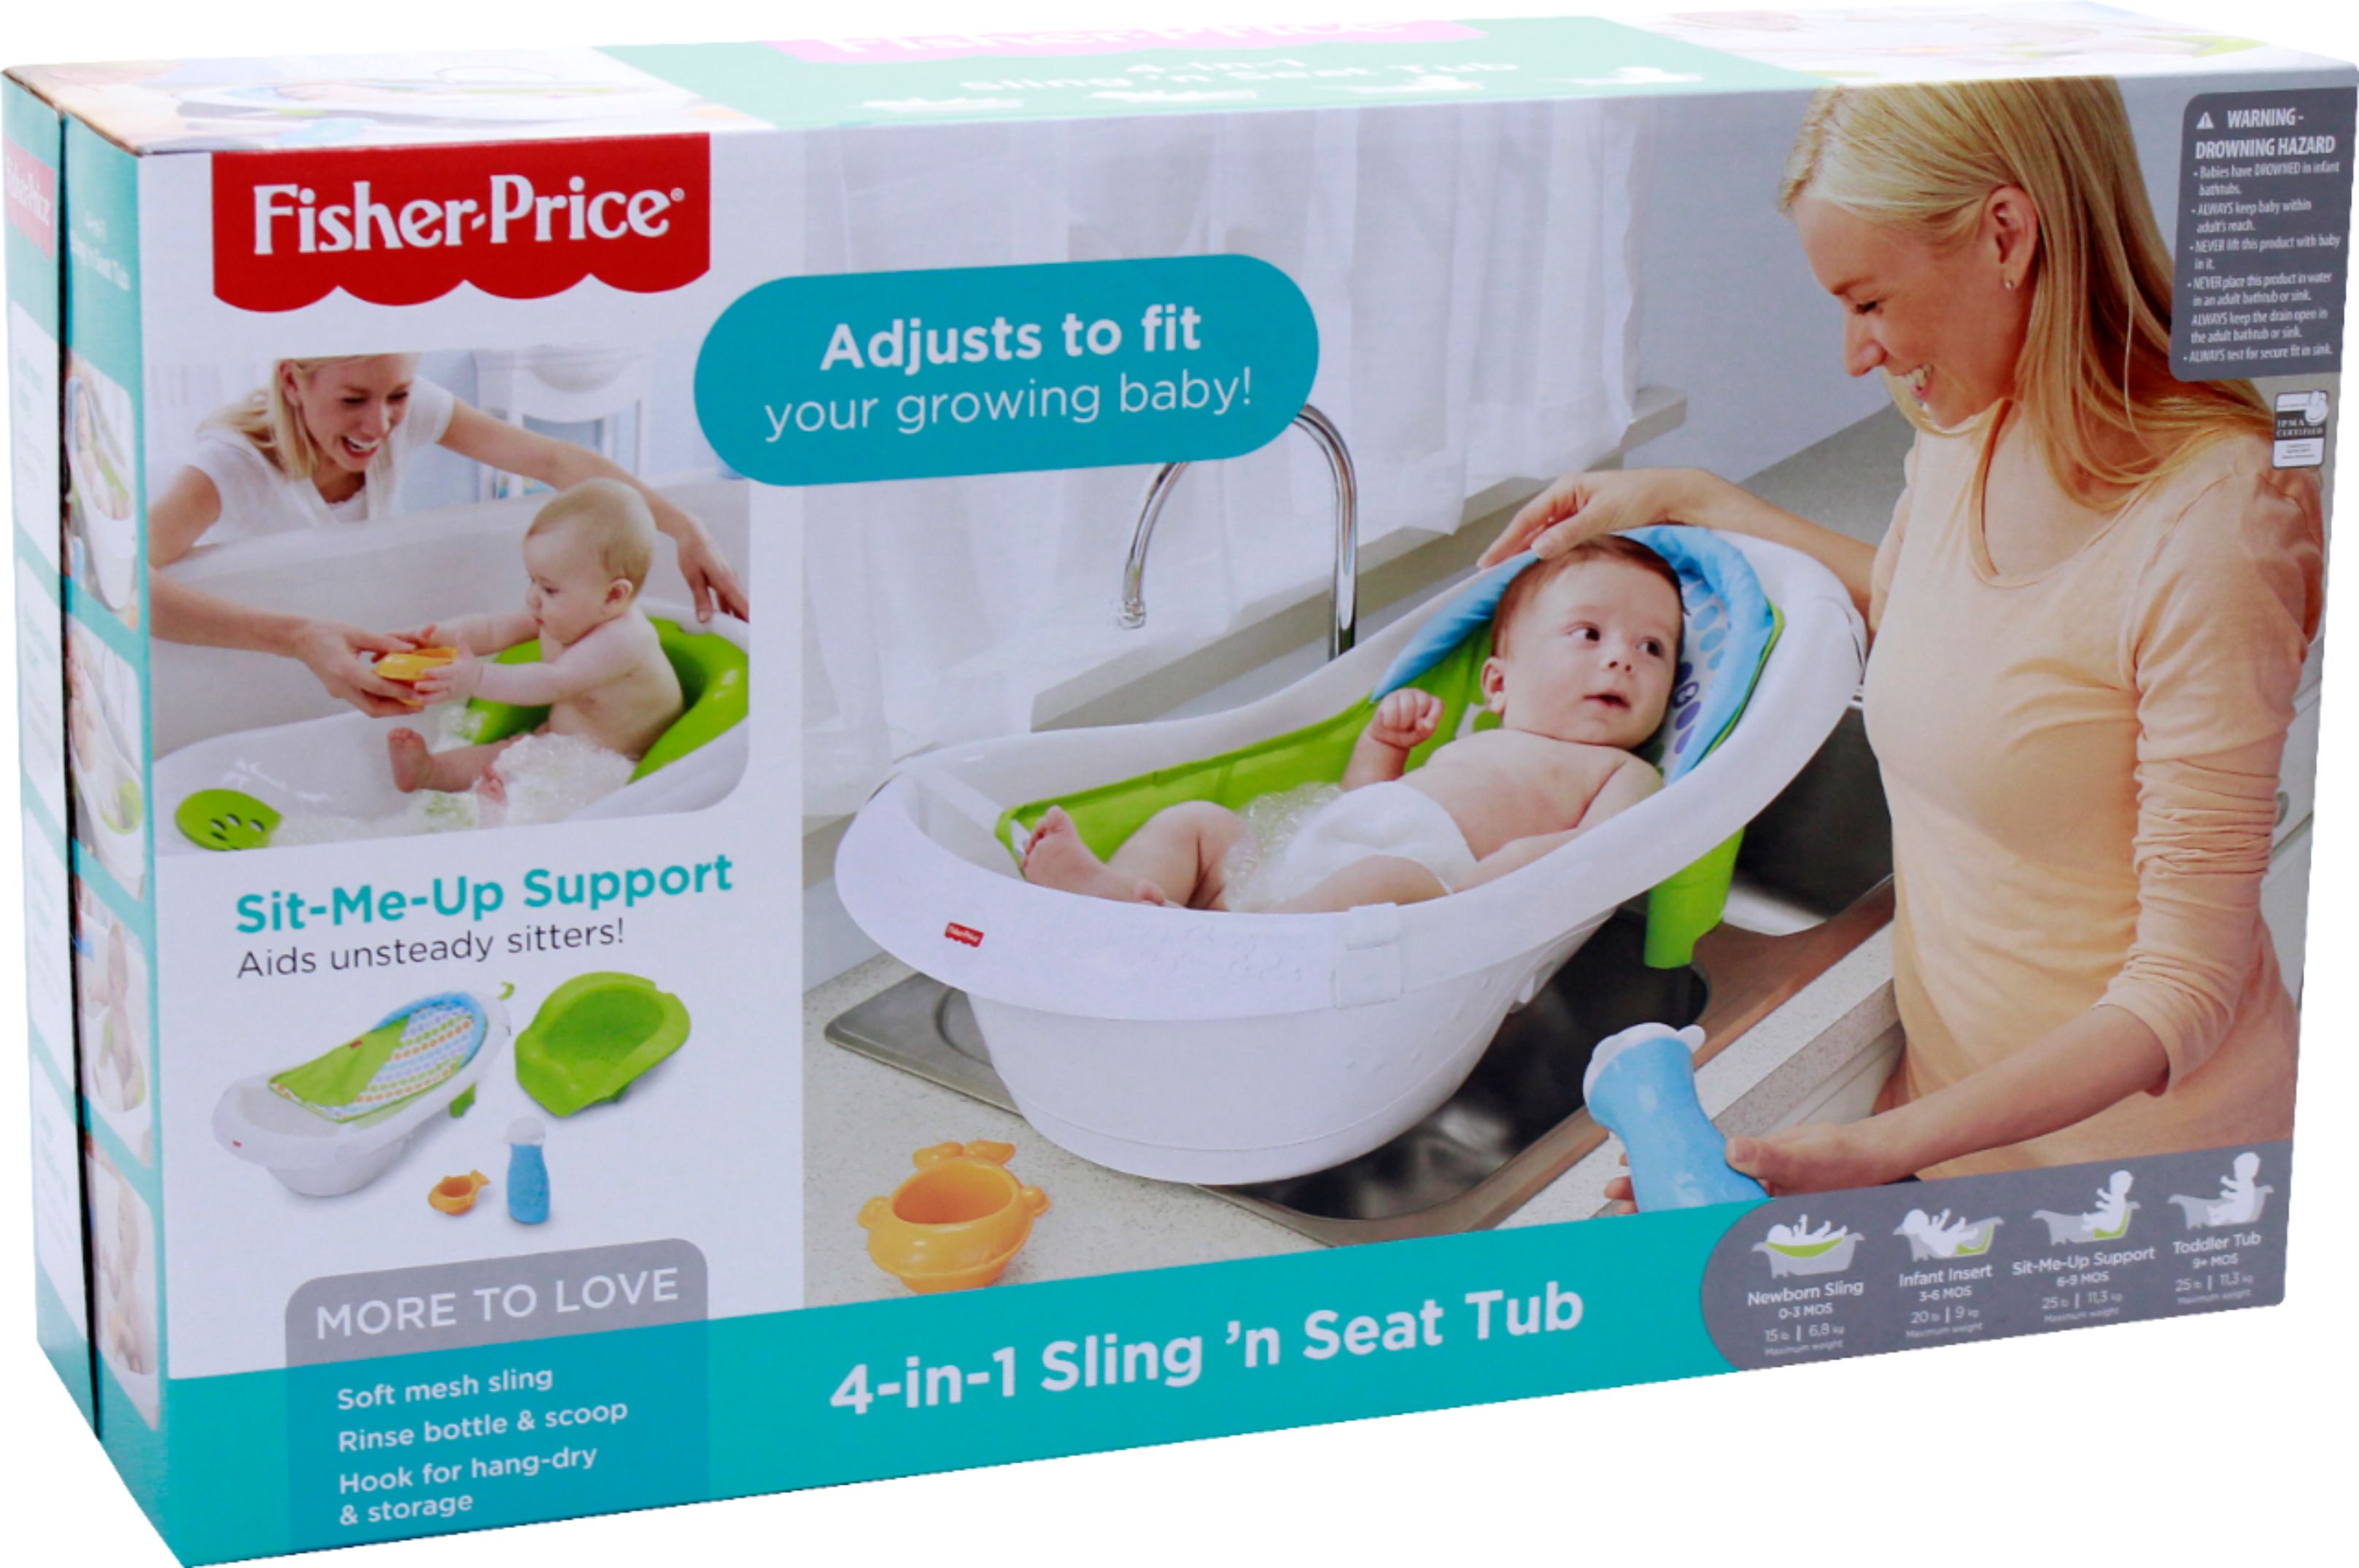 Fisher-Price 4-in-1 Sling n Seat Tub 